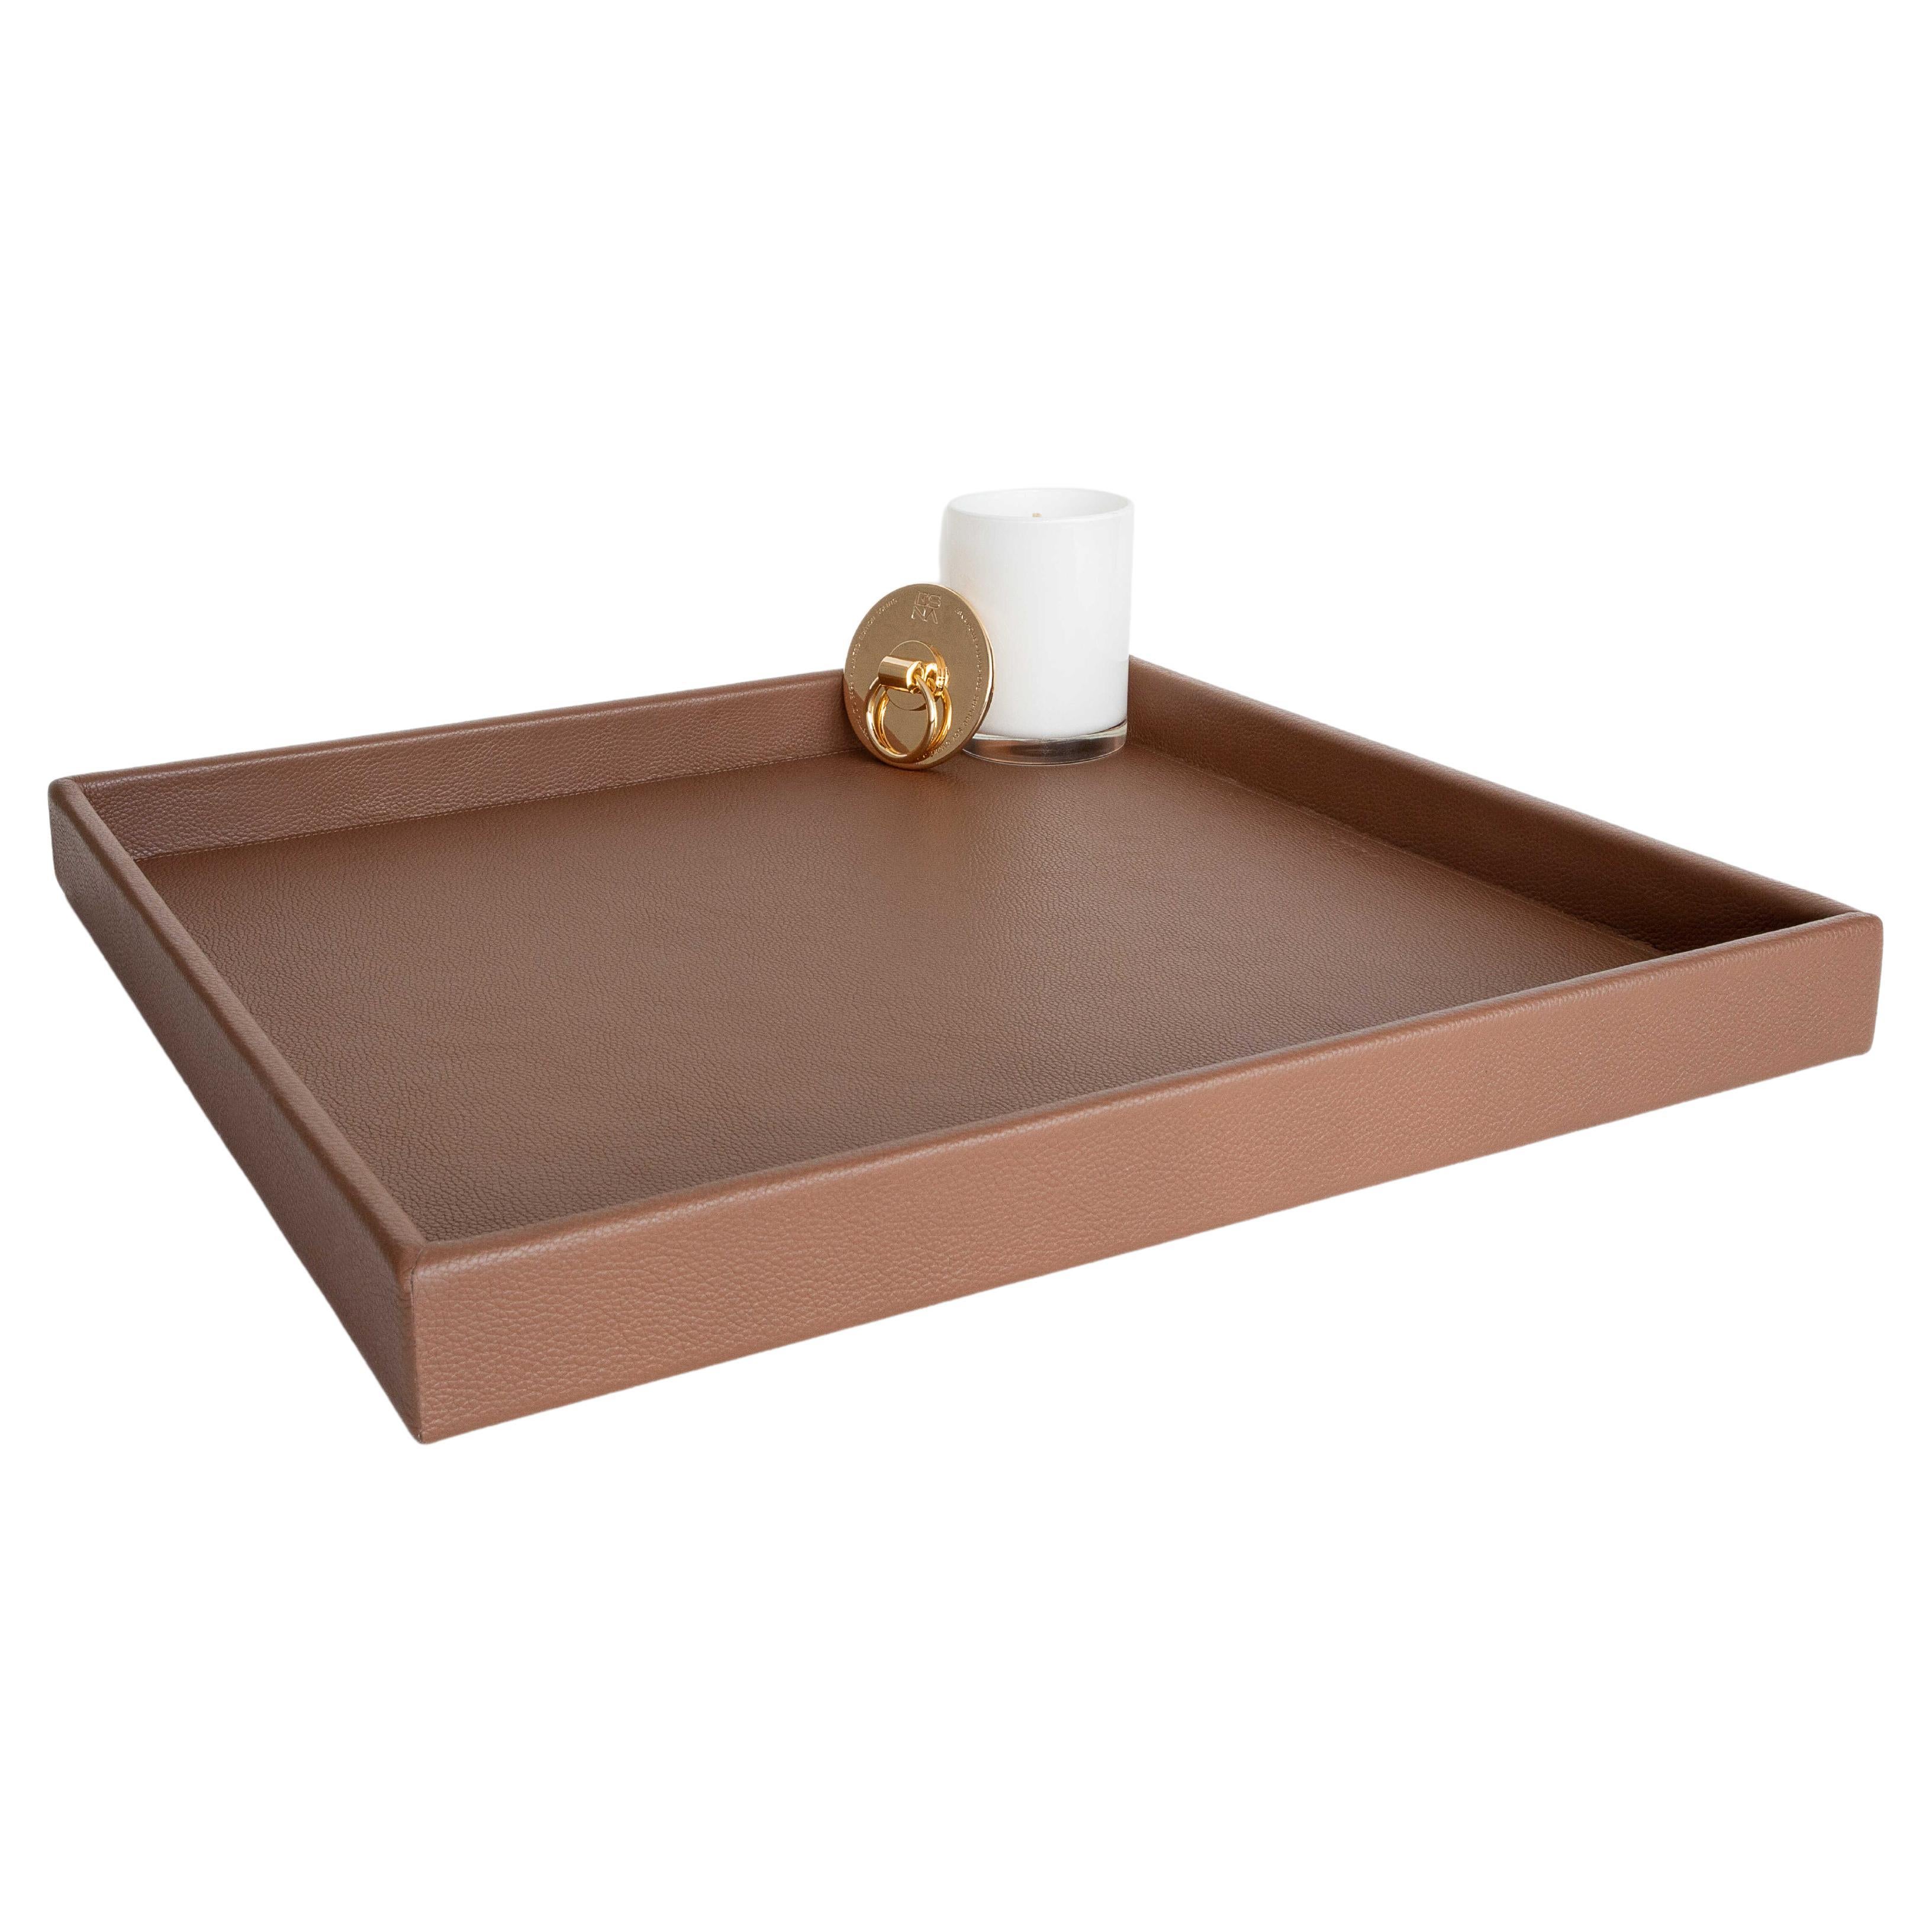 Leather Tray, Large B Square Tray, Handmade in Brazil - Color: Caramel